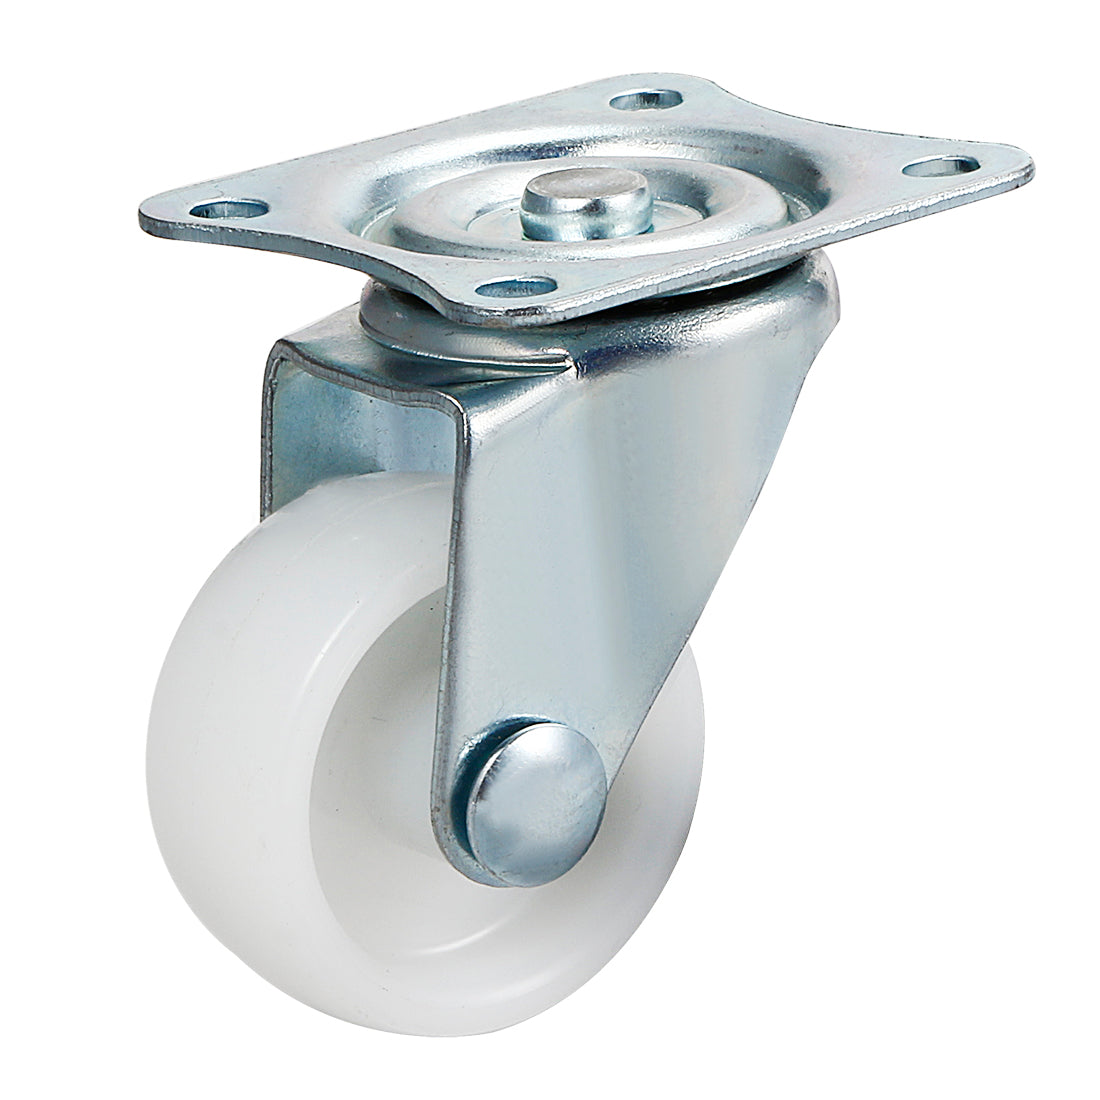 Uxcell Uxcell 8Pcs 1.5 Inch Swivel Casters Wheels PP Plastic Wheel Top Plate Mounted 44lb Load Capacity White